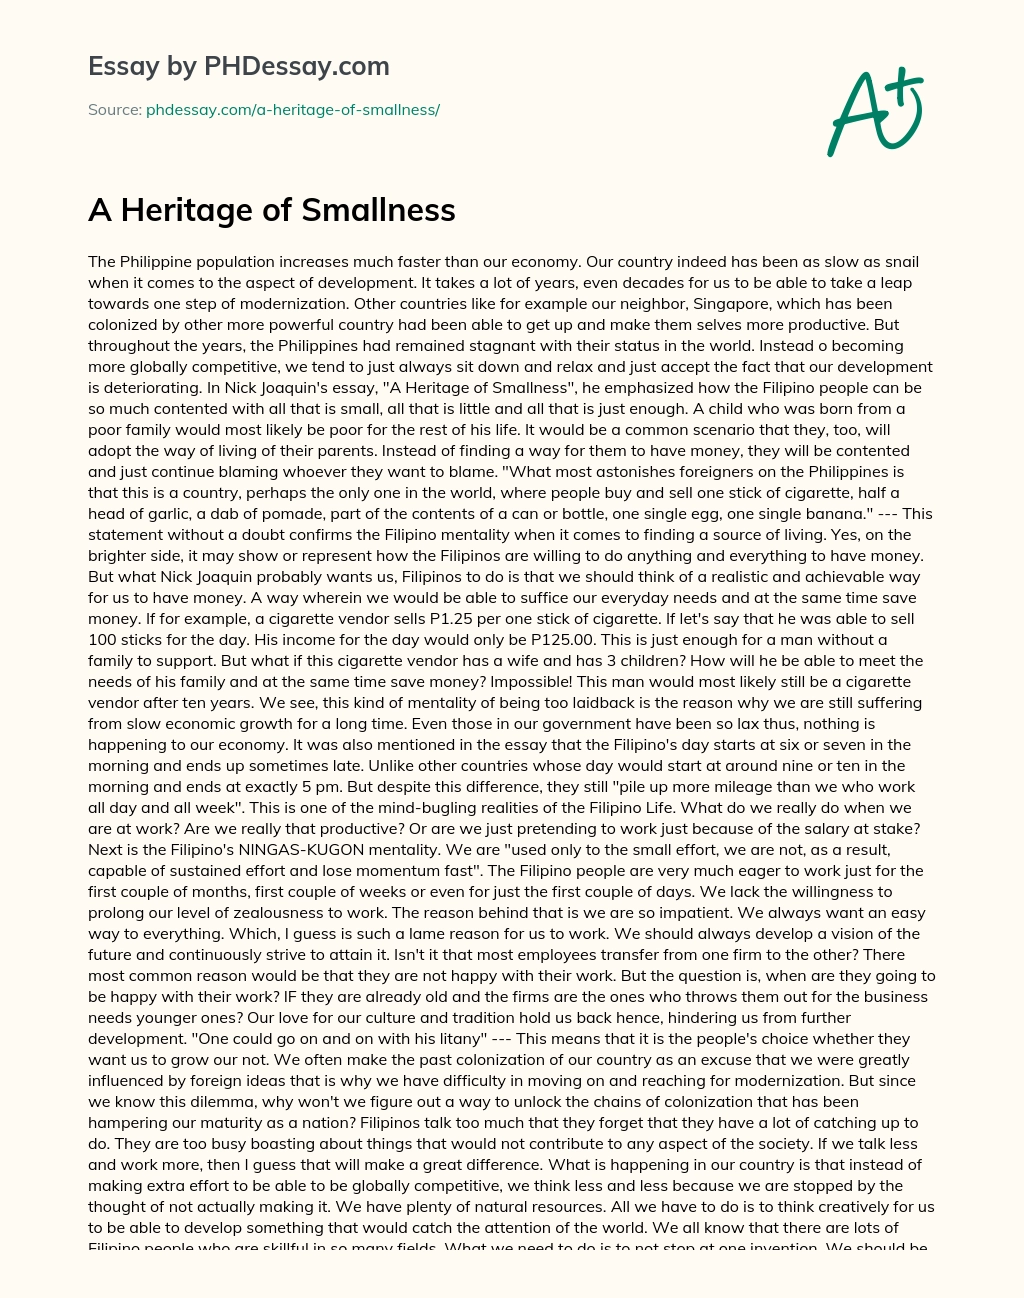 A Heritage of Smallness in the Philippines essay